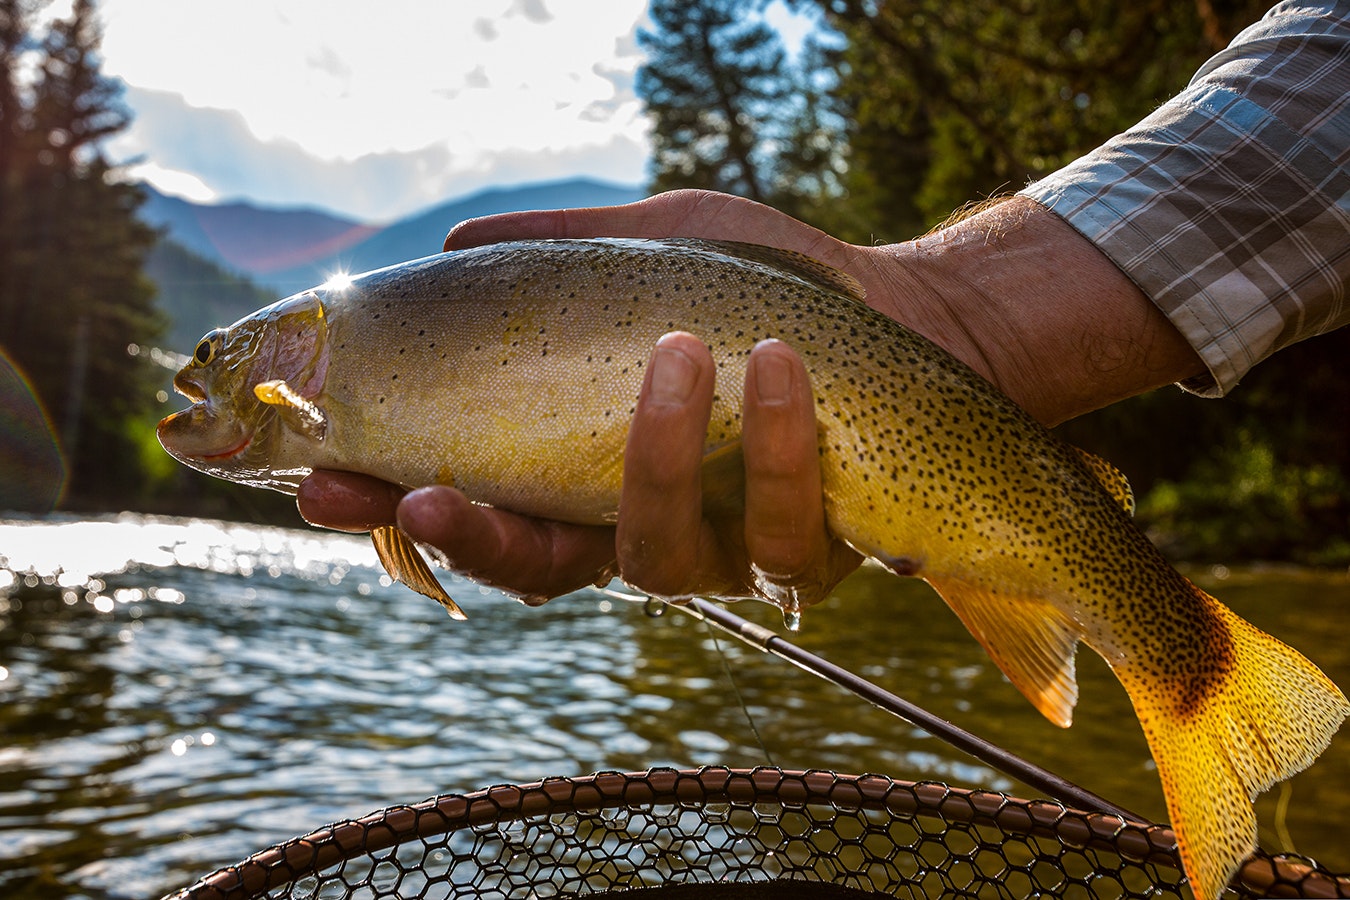 Golden trout in Wyoming rarely grow beyond 5 pounds, which is why the record 11-pound, 4-ounce fish listed as the state record seems sketchy.